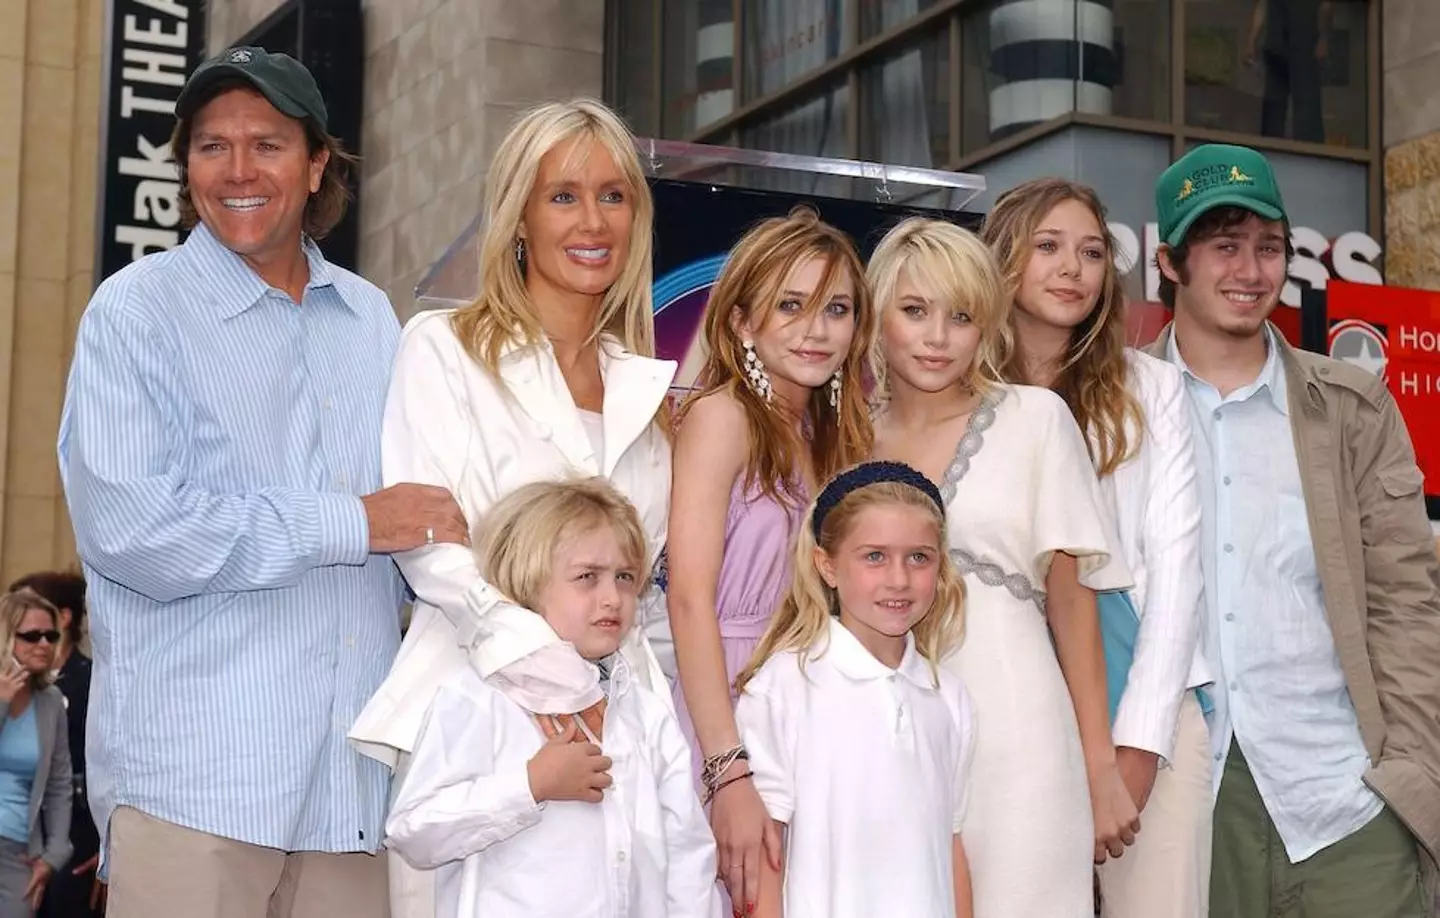 Turns out there are six Olsen siblings.